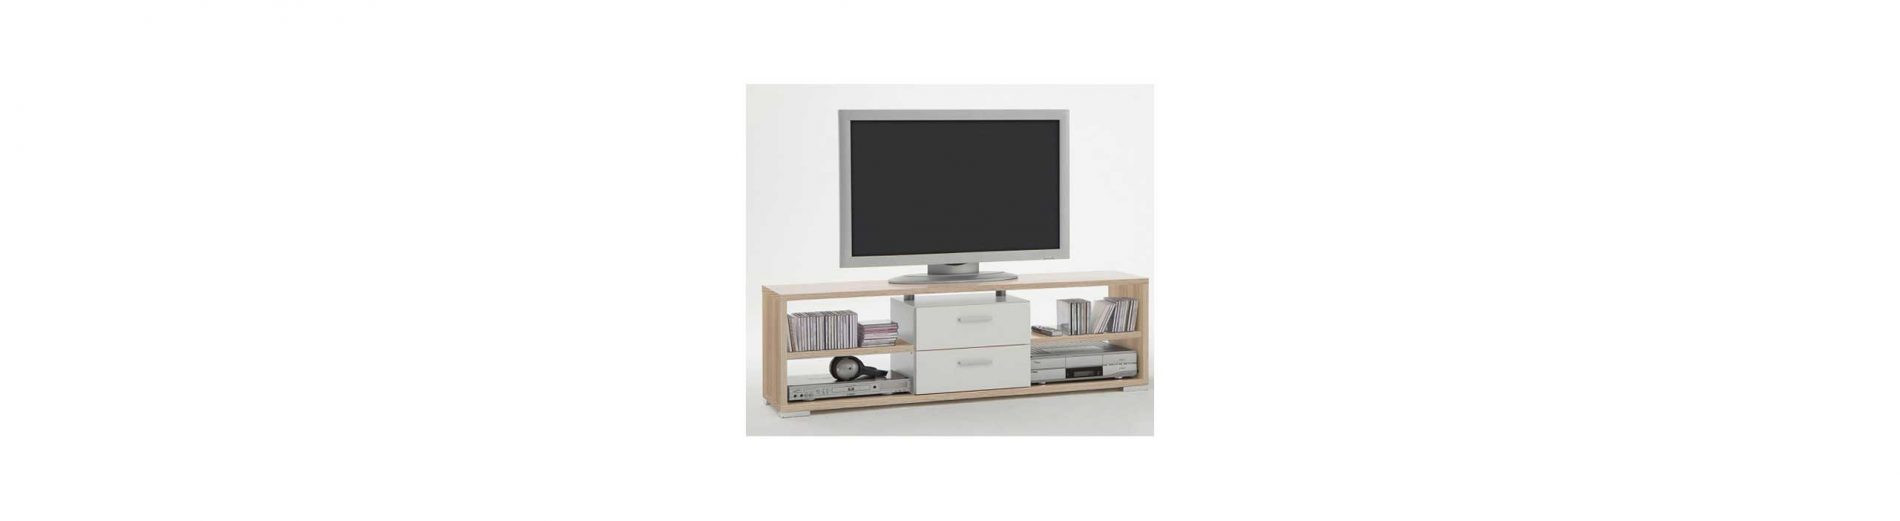 Tv Stands For Kids Room
 5 Important Tips While Choosing Children’s Rooms TV Stands